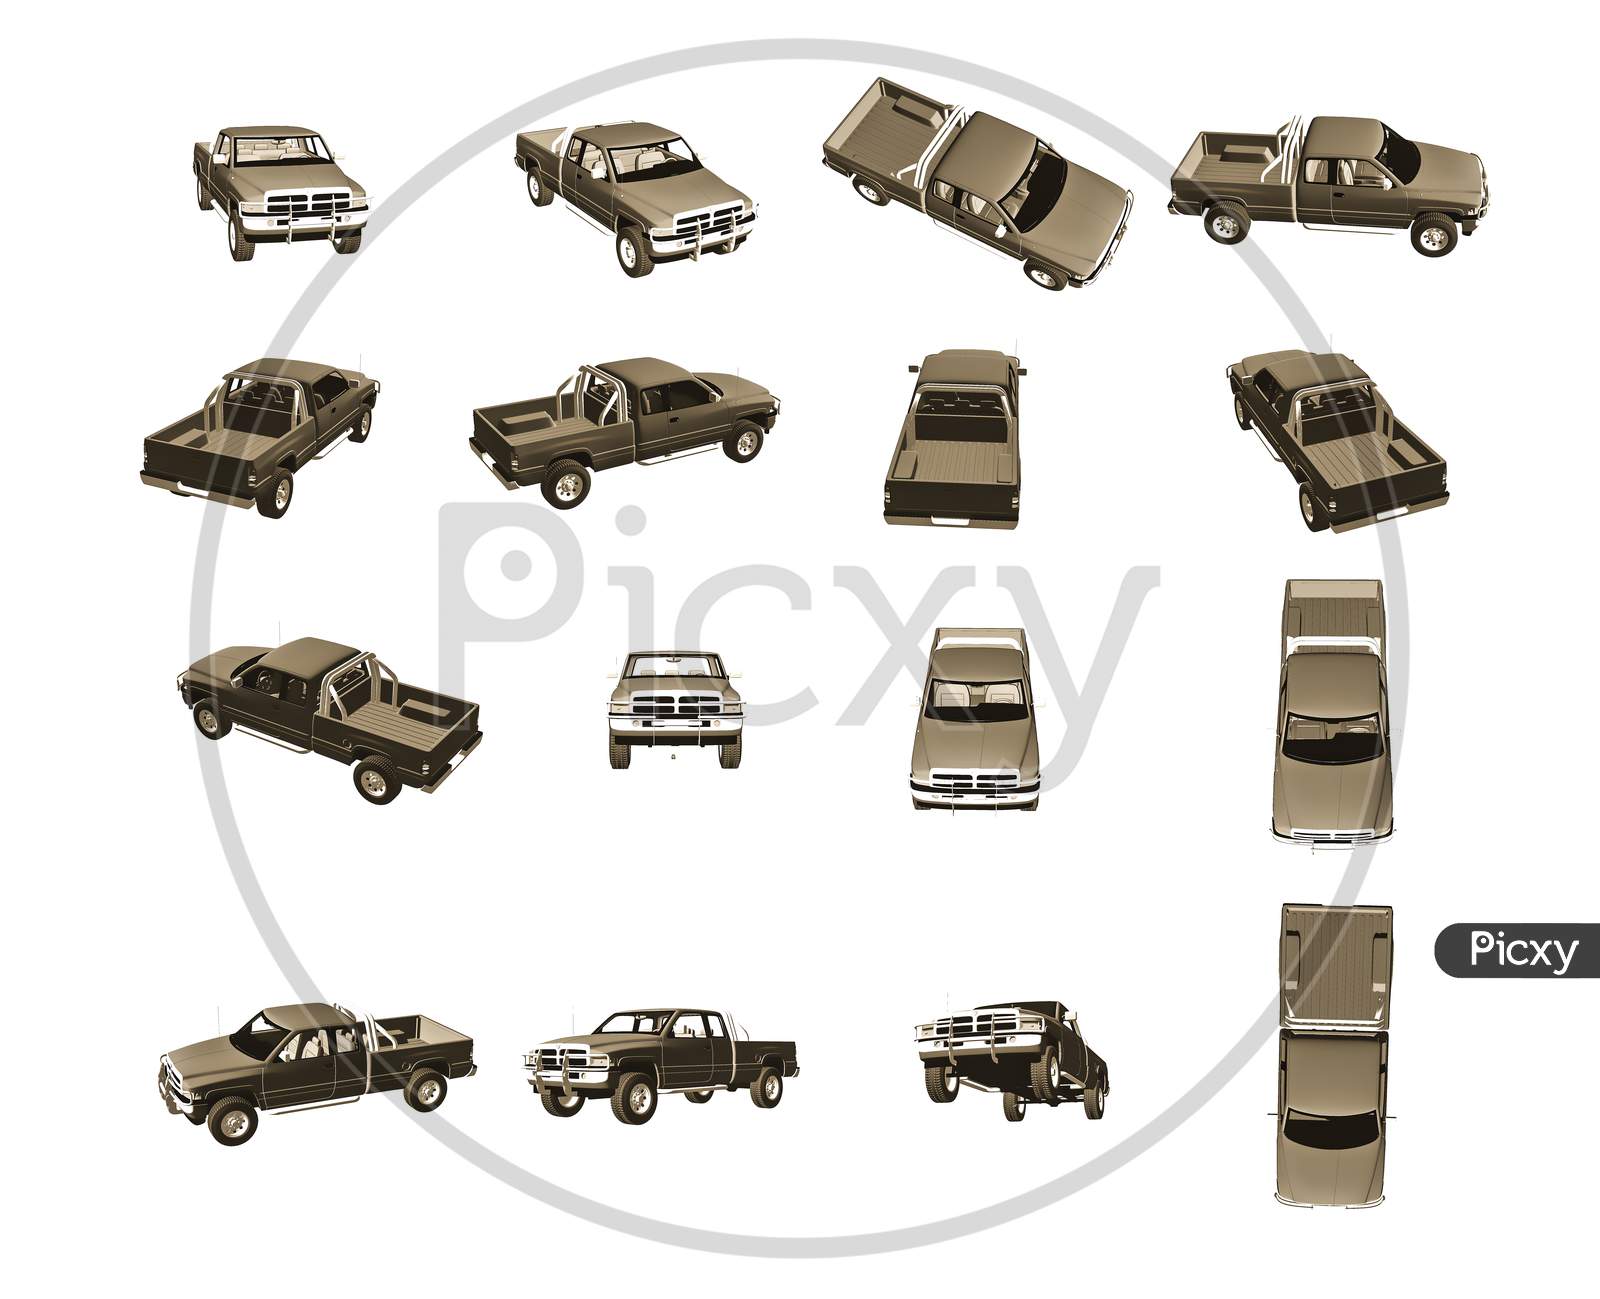 3D Lory Car Model Set Isolated On A Light Background. 3D Rendering Illustration Lory Car Set Of Different Views For Vfx And Animation Movie And Video Game Projects.